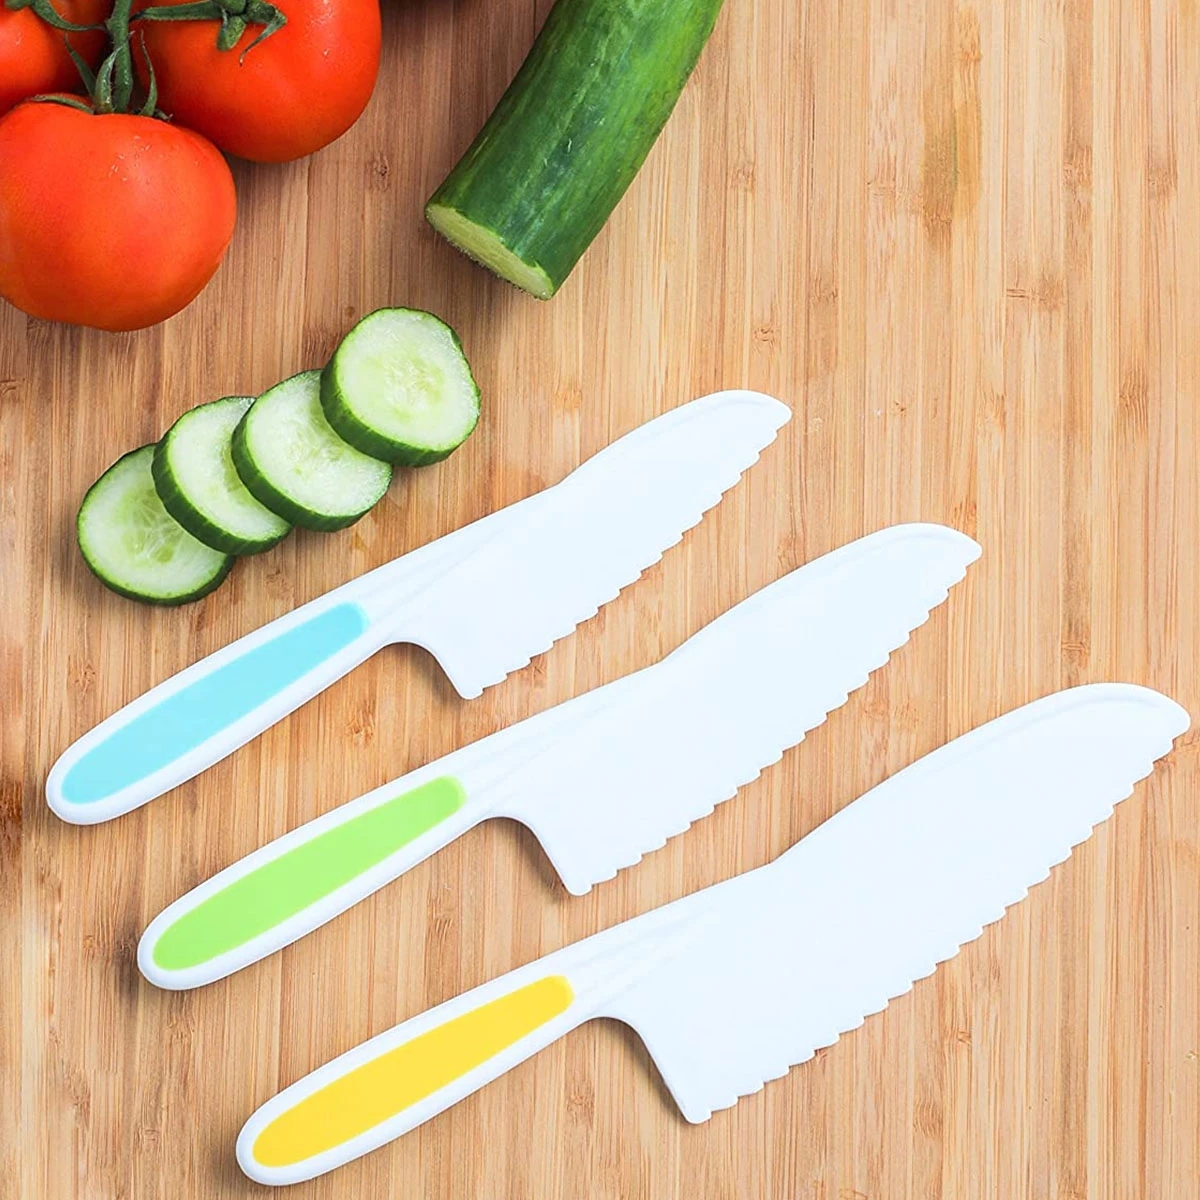 Zulay Kitchen Kids Knife Set for Cooking and Cutting - Green & White